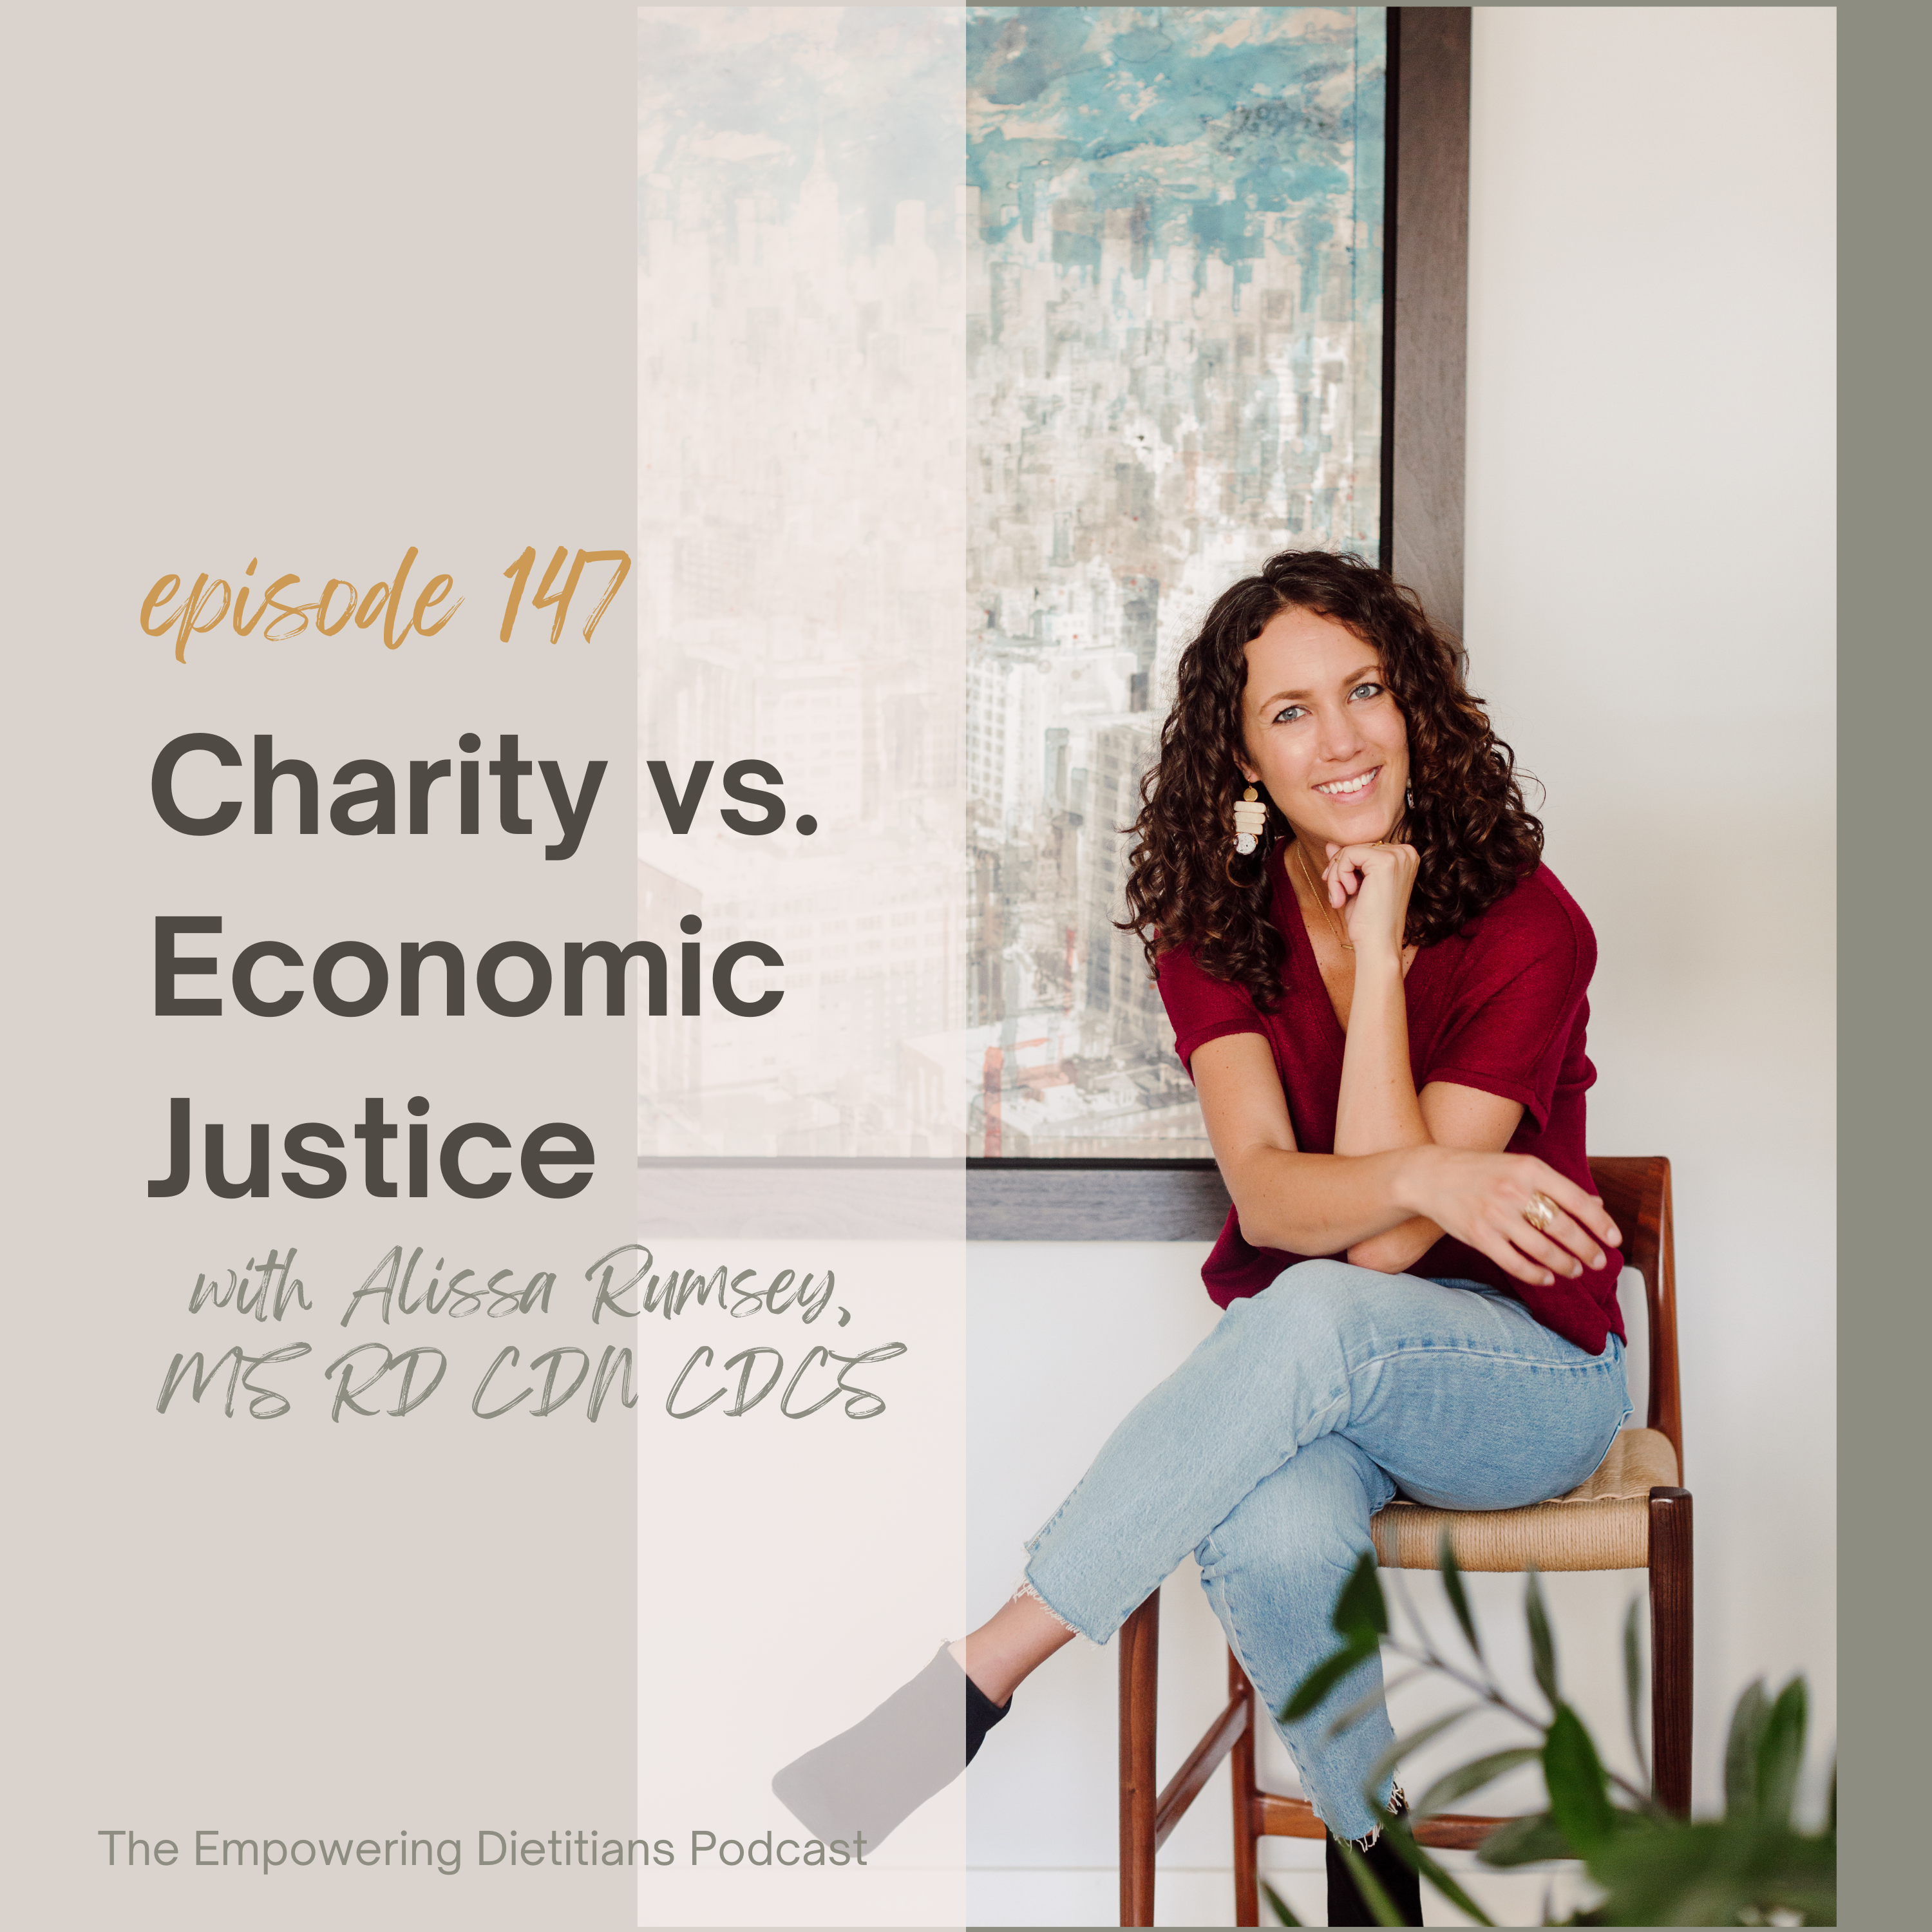 Charity vs Economic Justice with Alissa Rumsey, MS RD CDN CSCS